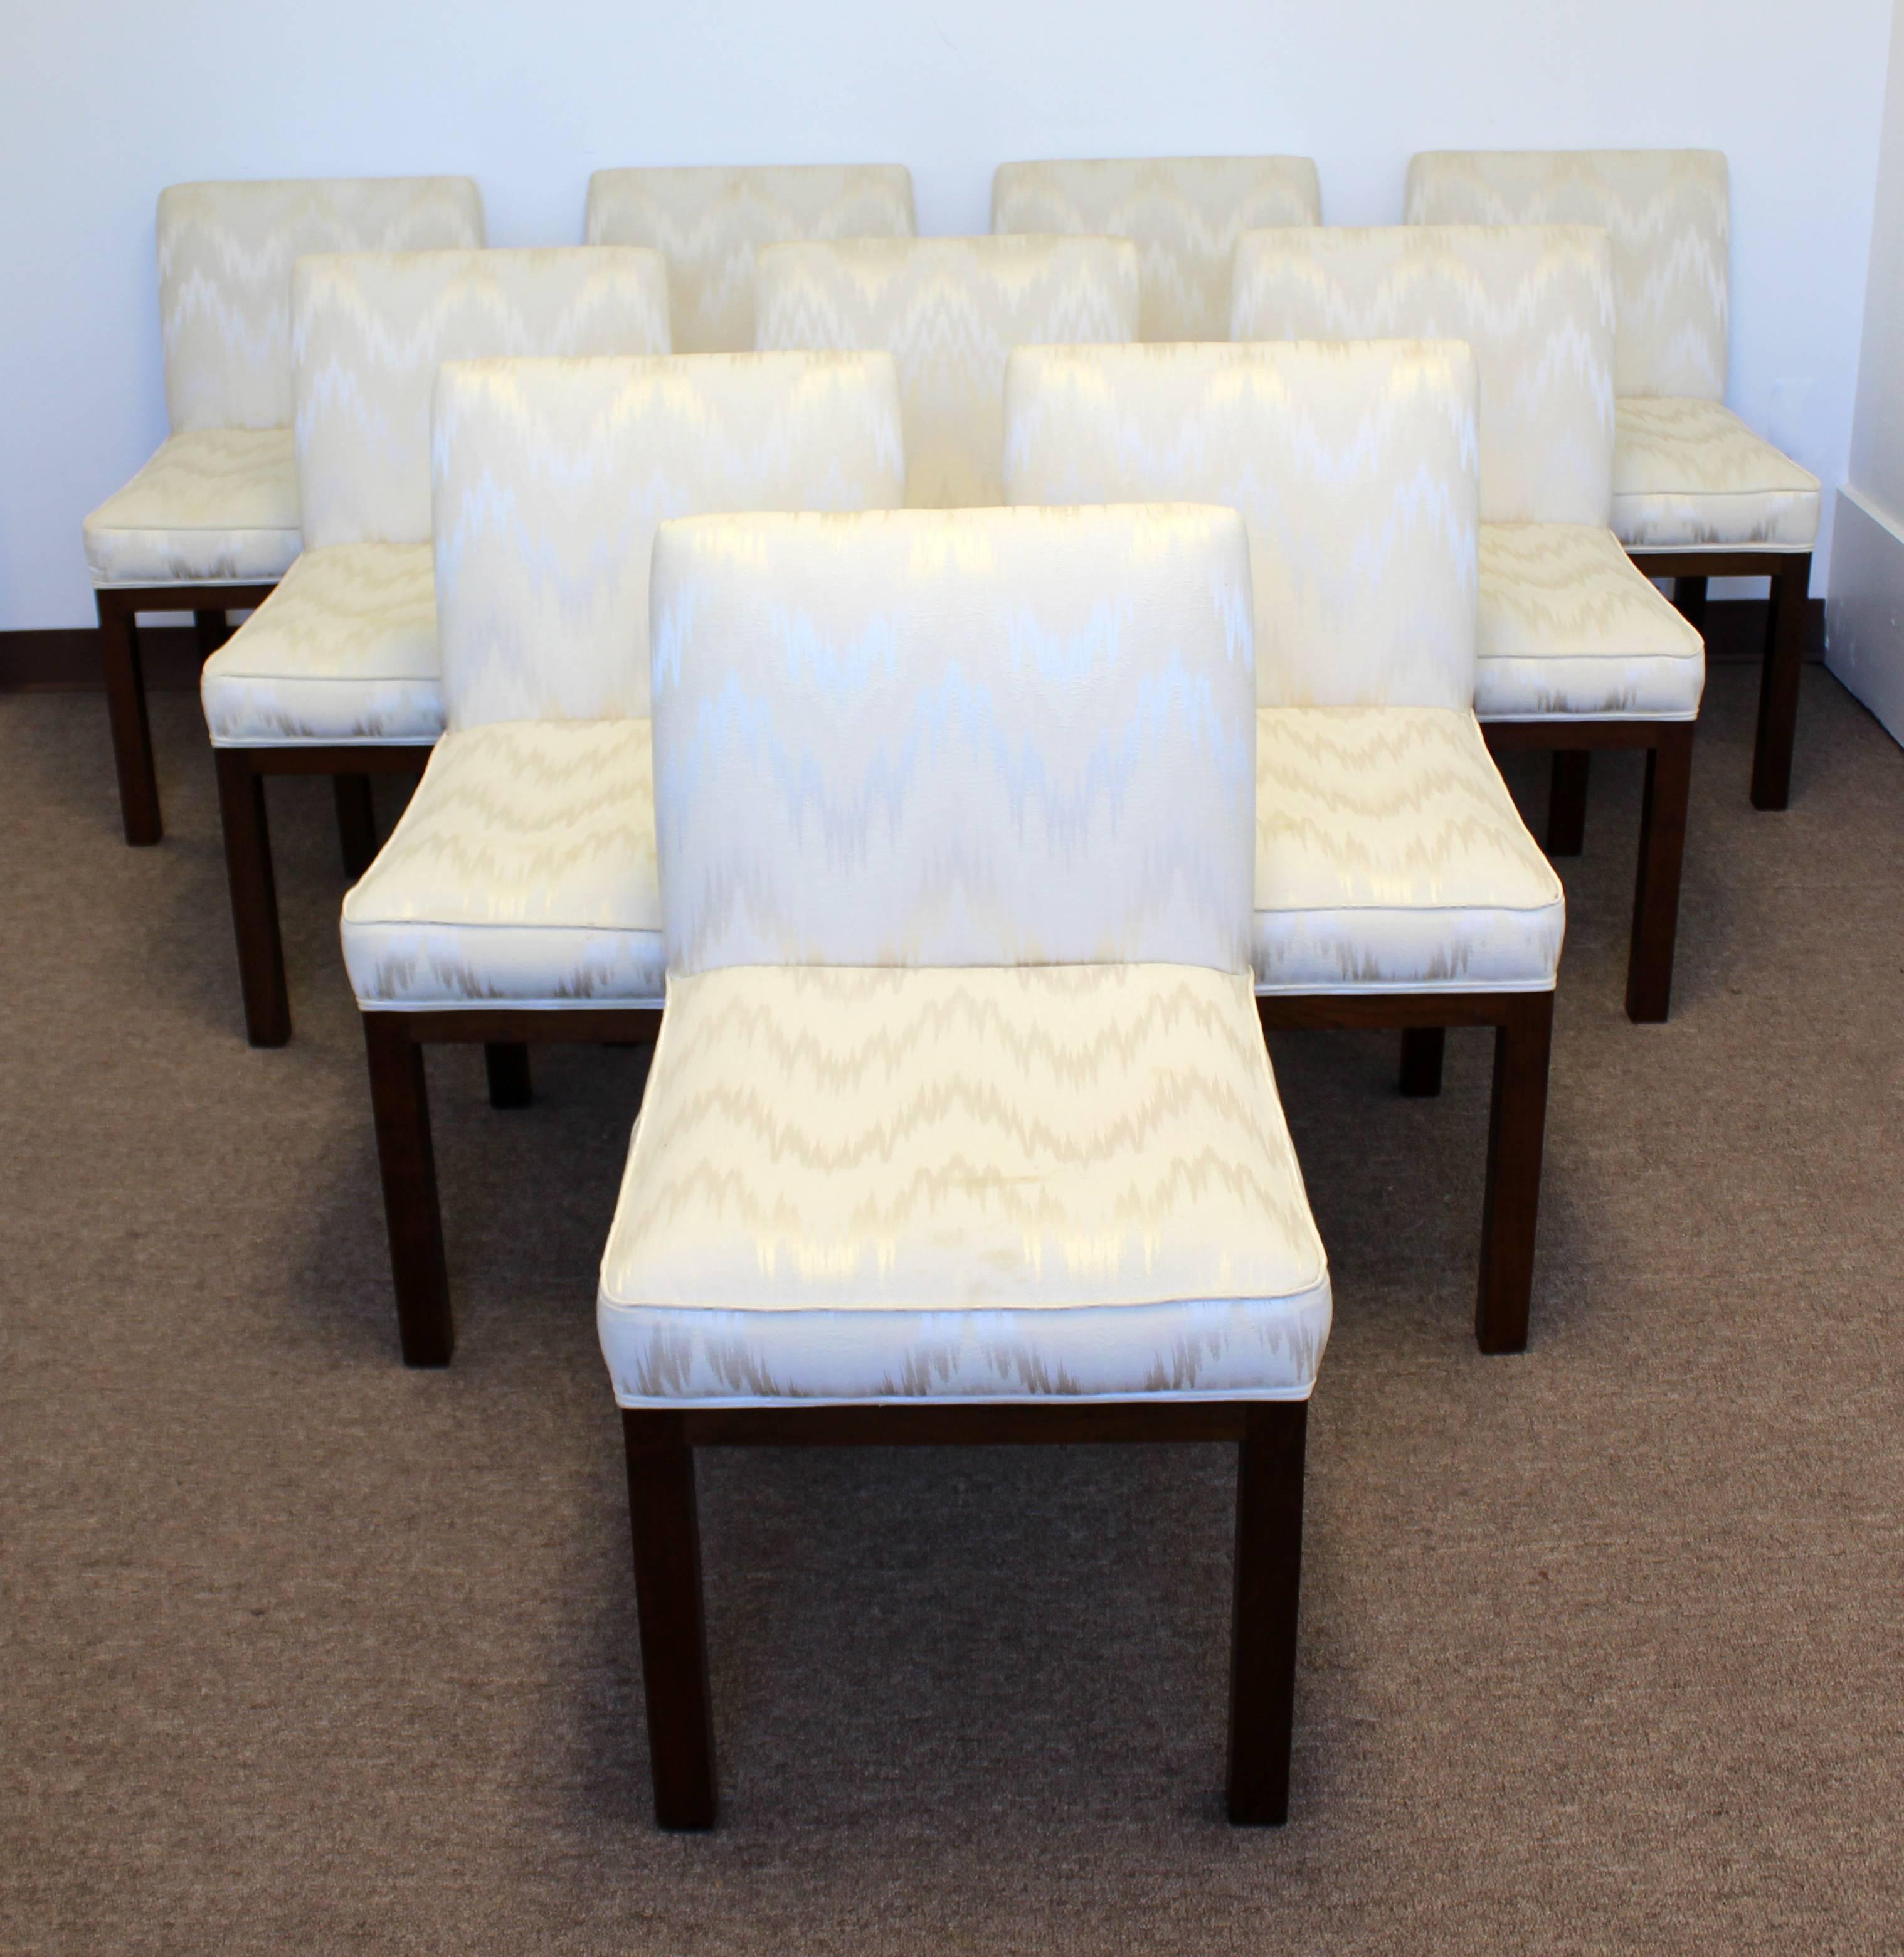 For your consideration is a stunning set of ten Edward Wormley for Dunbar dining side chairs. In excellent vintage condition. The dimensions are 19